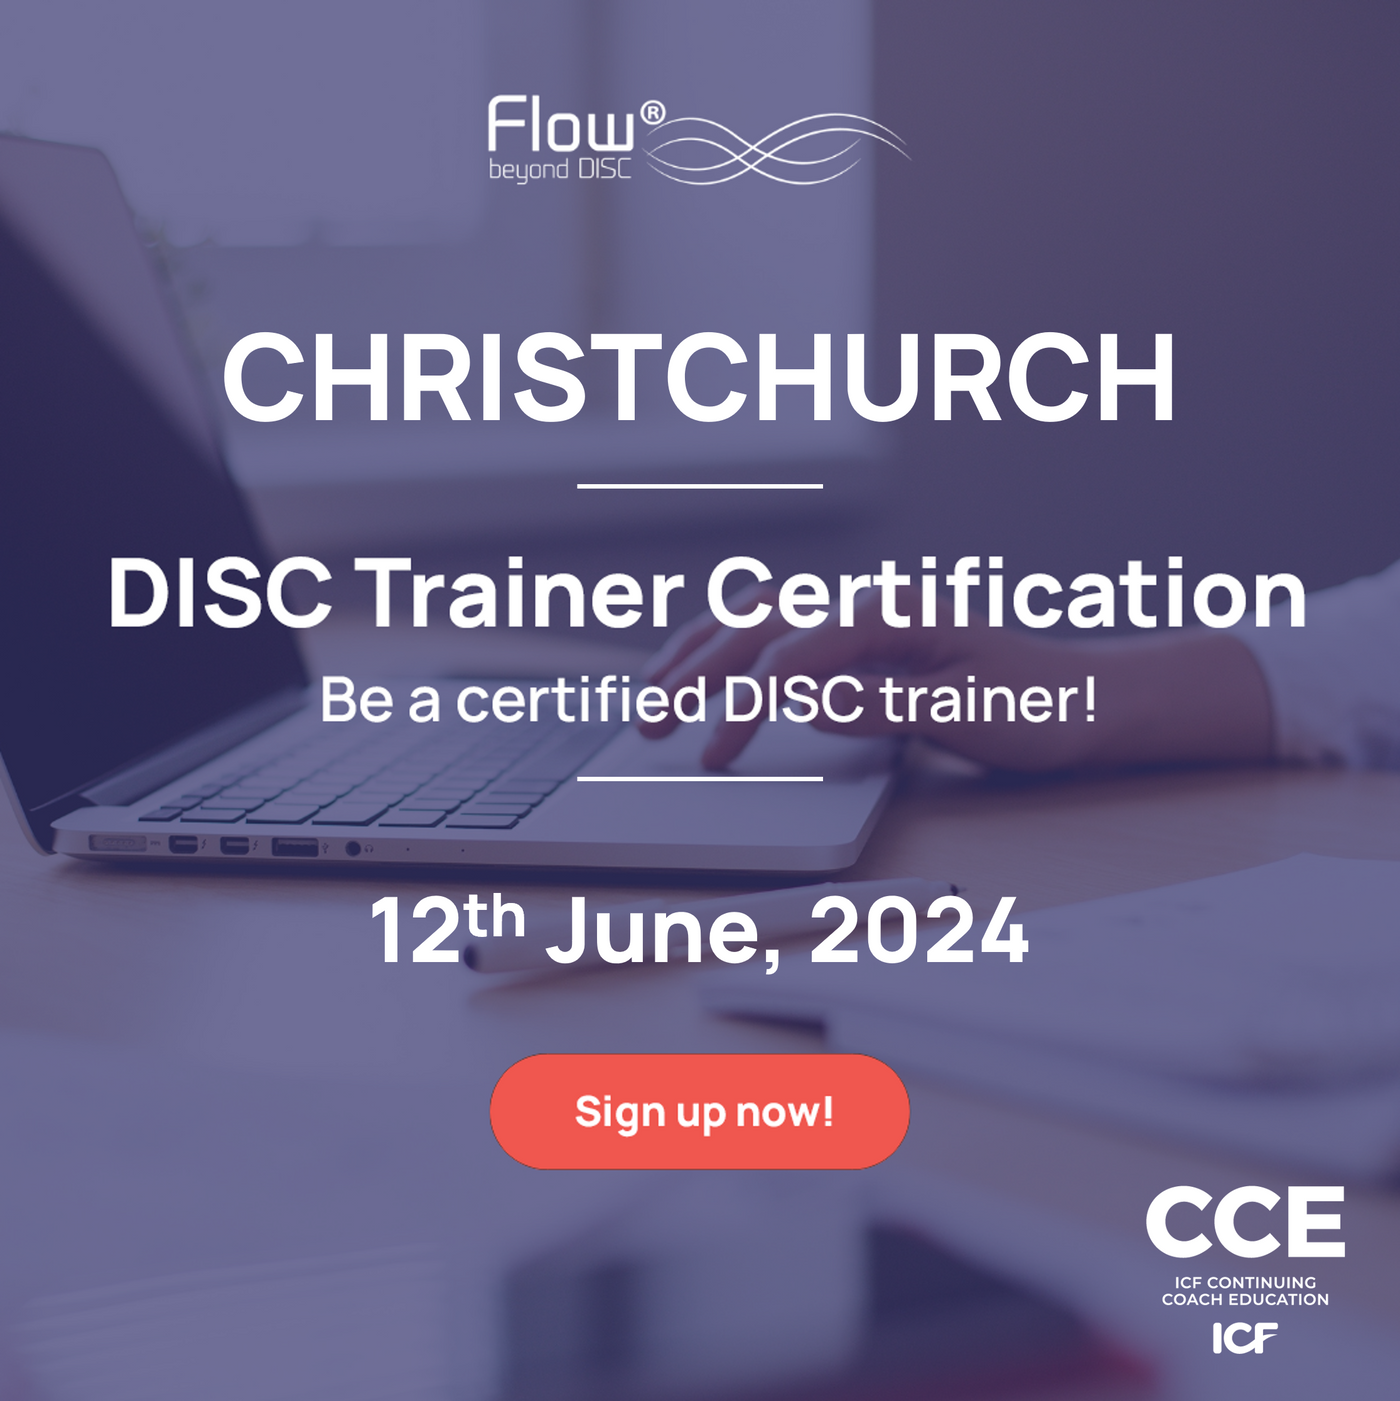 CHRISTCHURCH Advanced Certification Course - receives ICF CCE points